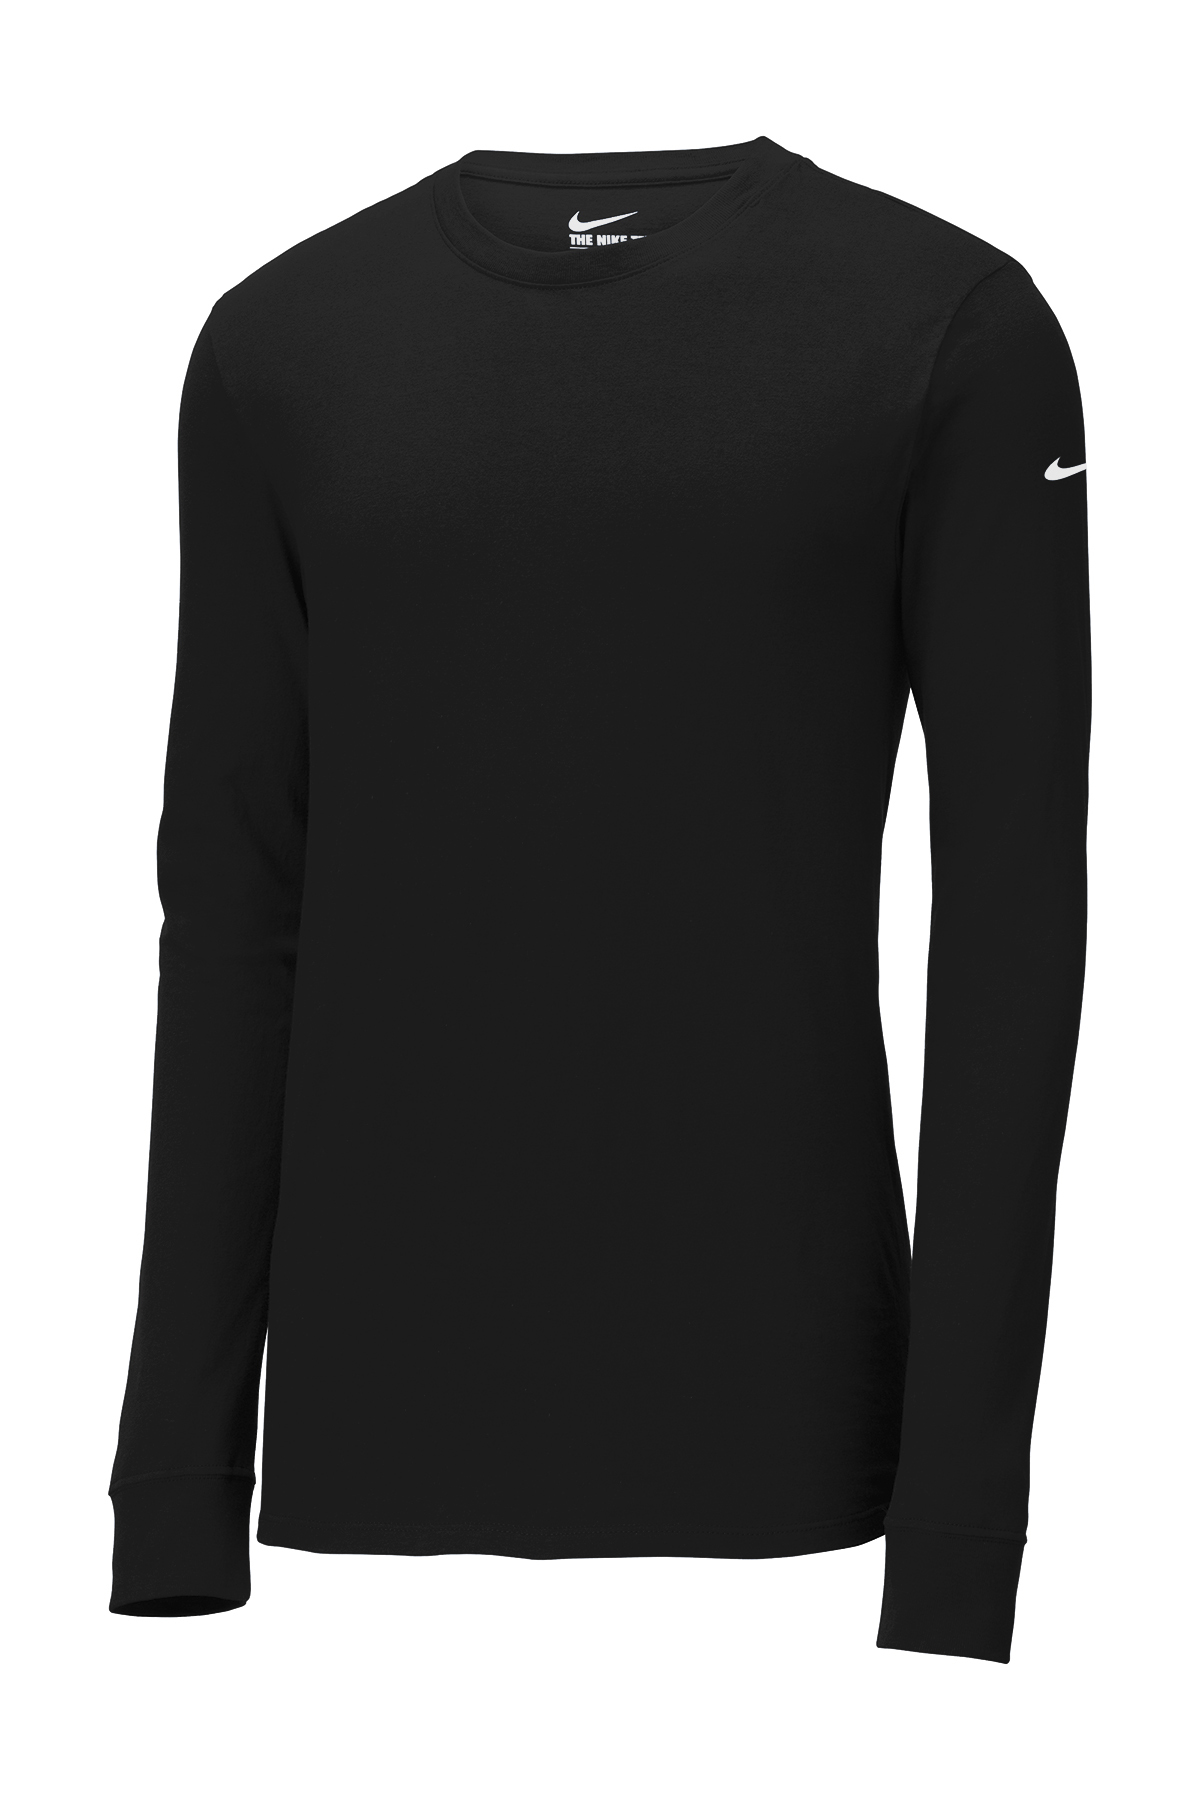 Nike Dri-FIT Cotton/Poly Long Sleeve Tee | Product | Company Casuals